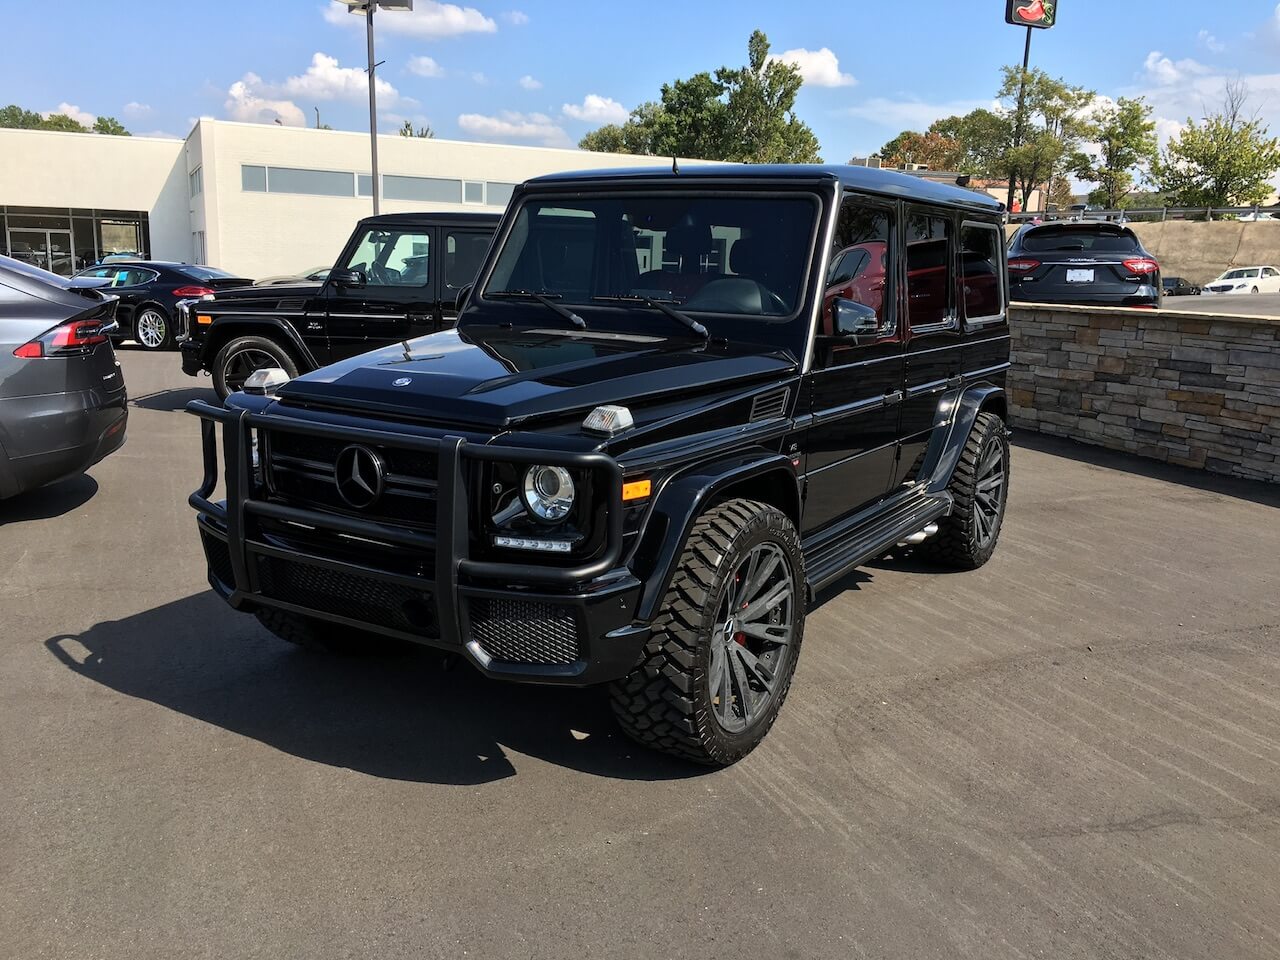 Reasons to Rent a Mercedes G-Wagon